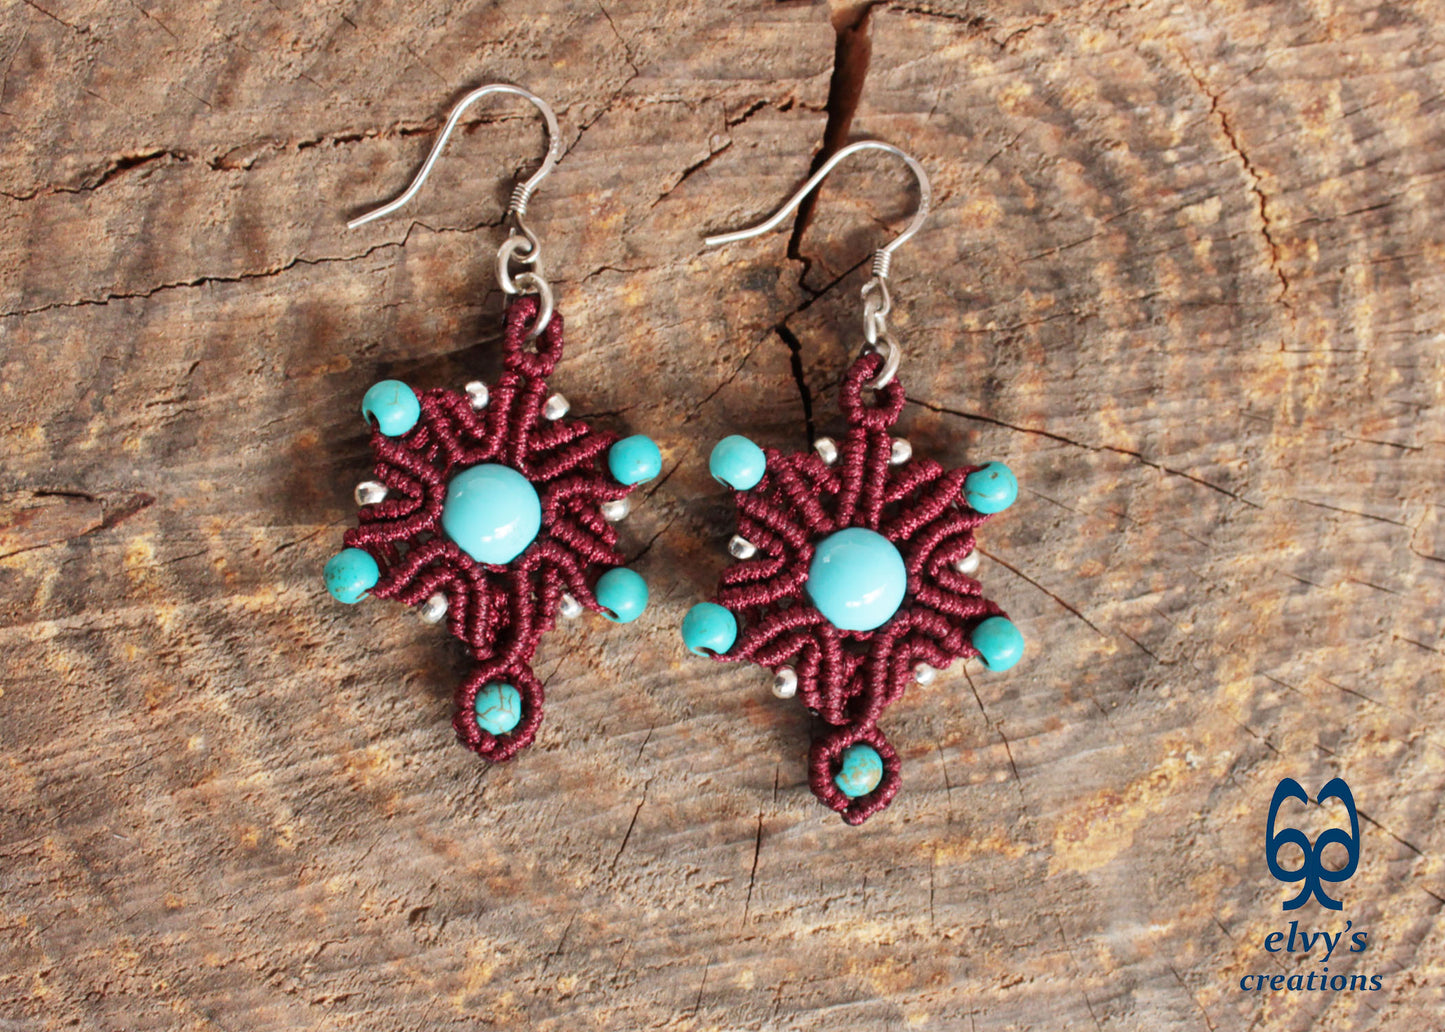 Handmade Red Macrame Earrings Silver Dangle with Turquoise Gemstones